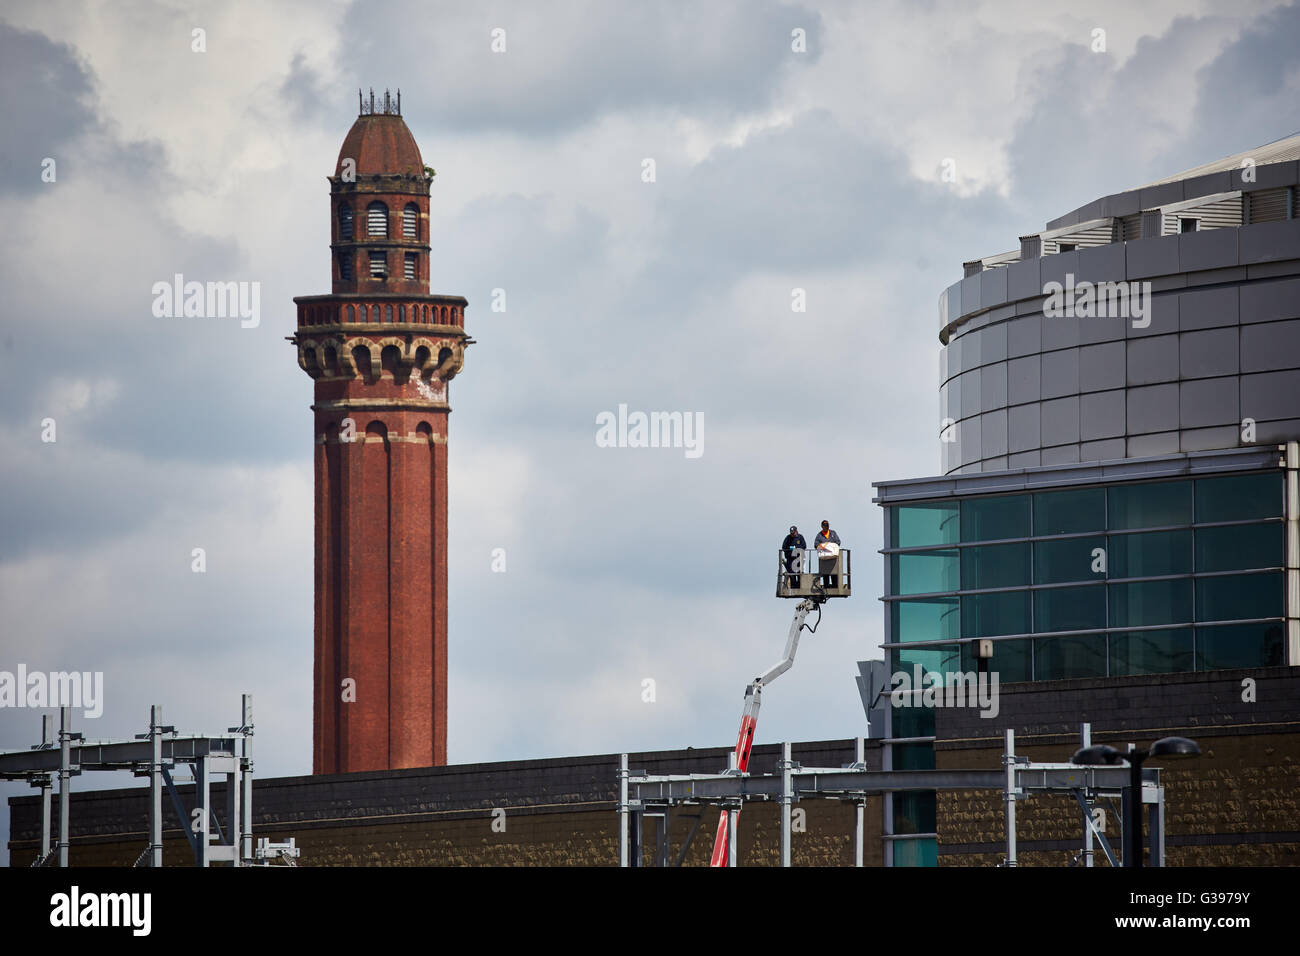 HM Prison Manchester (commonly known as Strangeways) is a high-security male prison in Manchester, England, operated by Her Maje Stock Photo